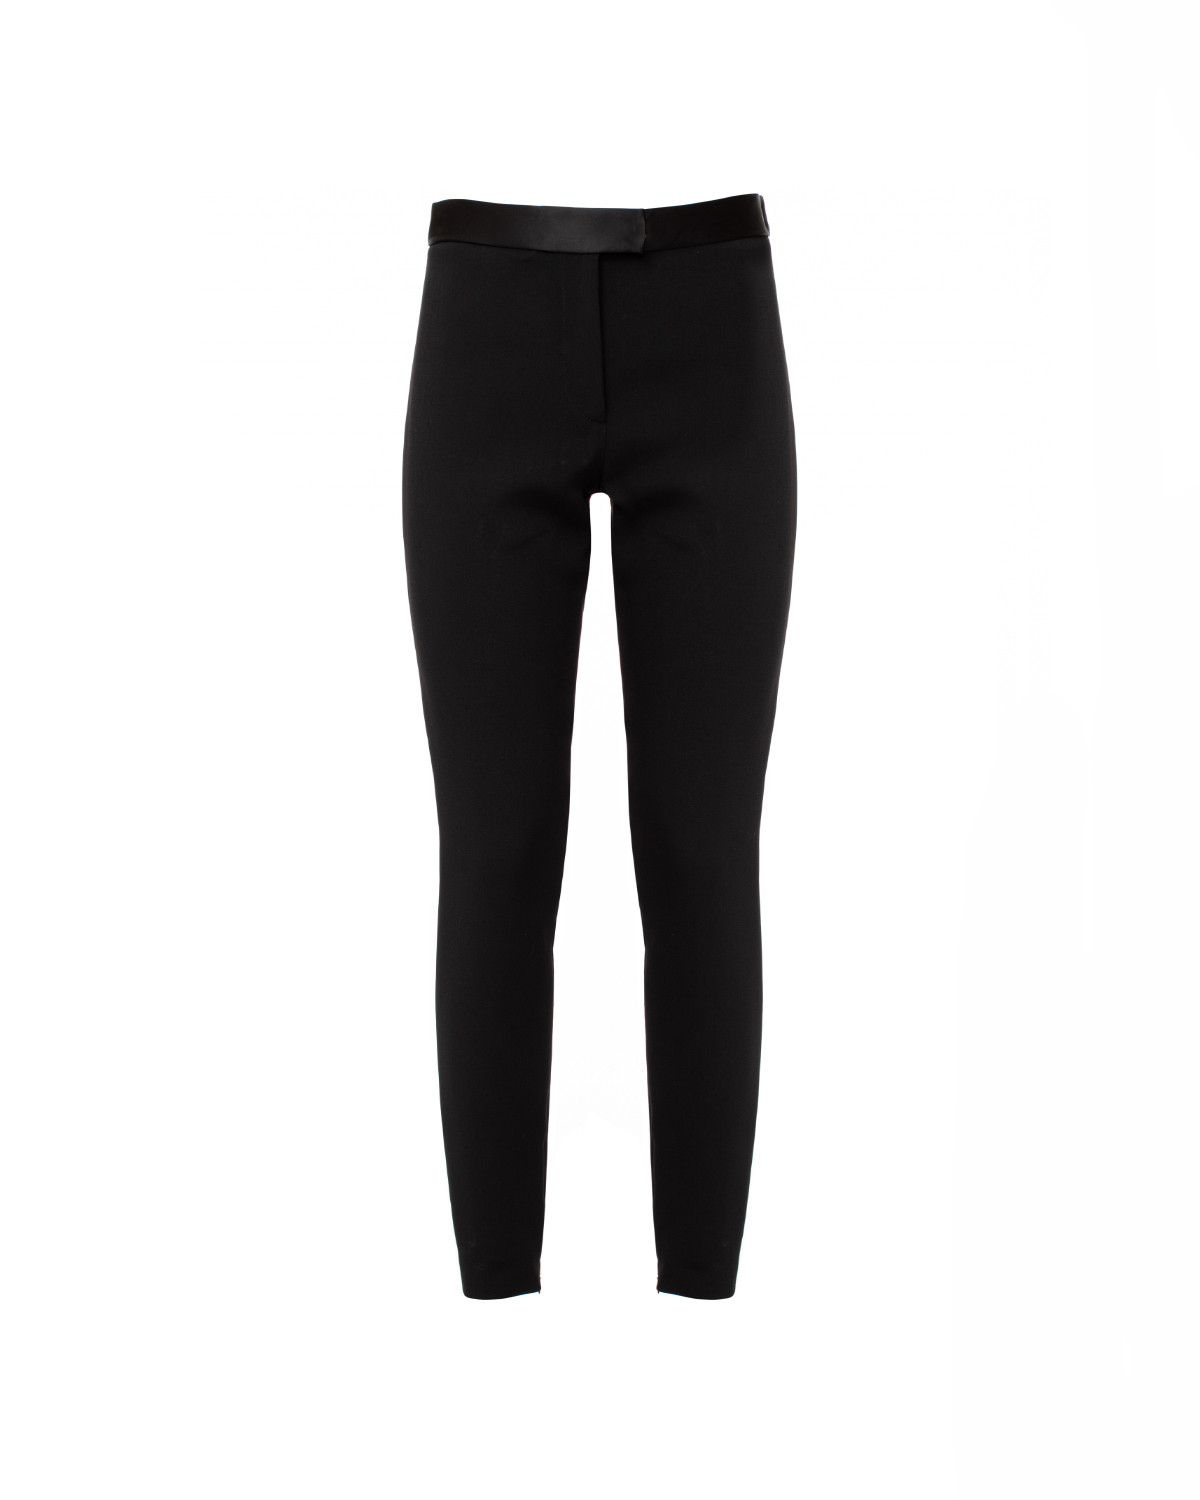 High-waisted stretch pants in black